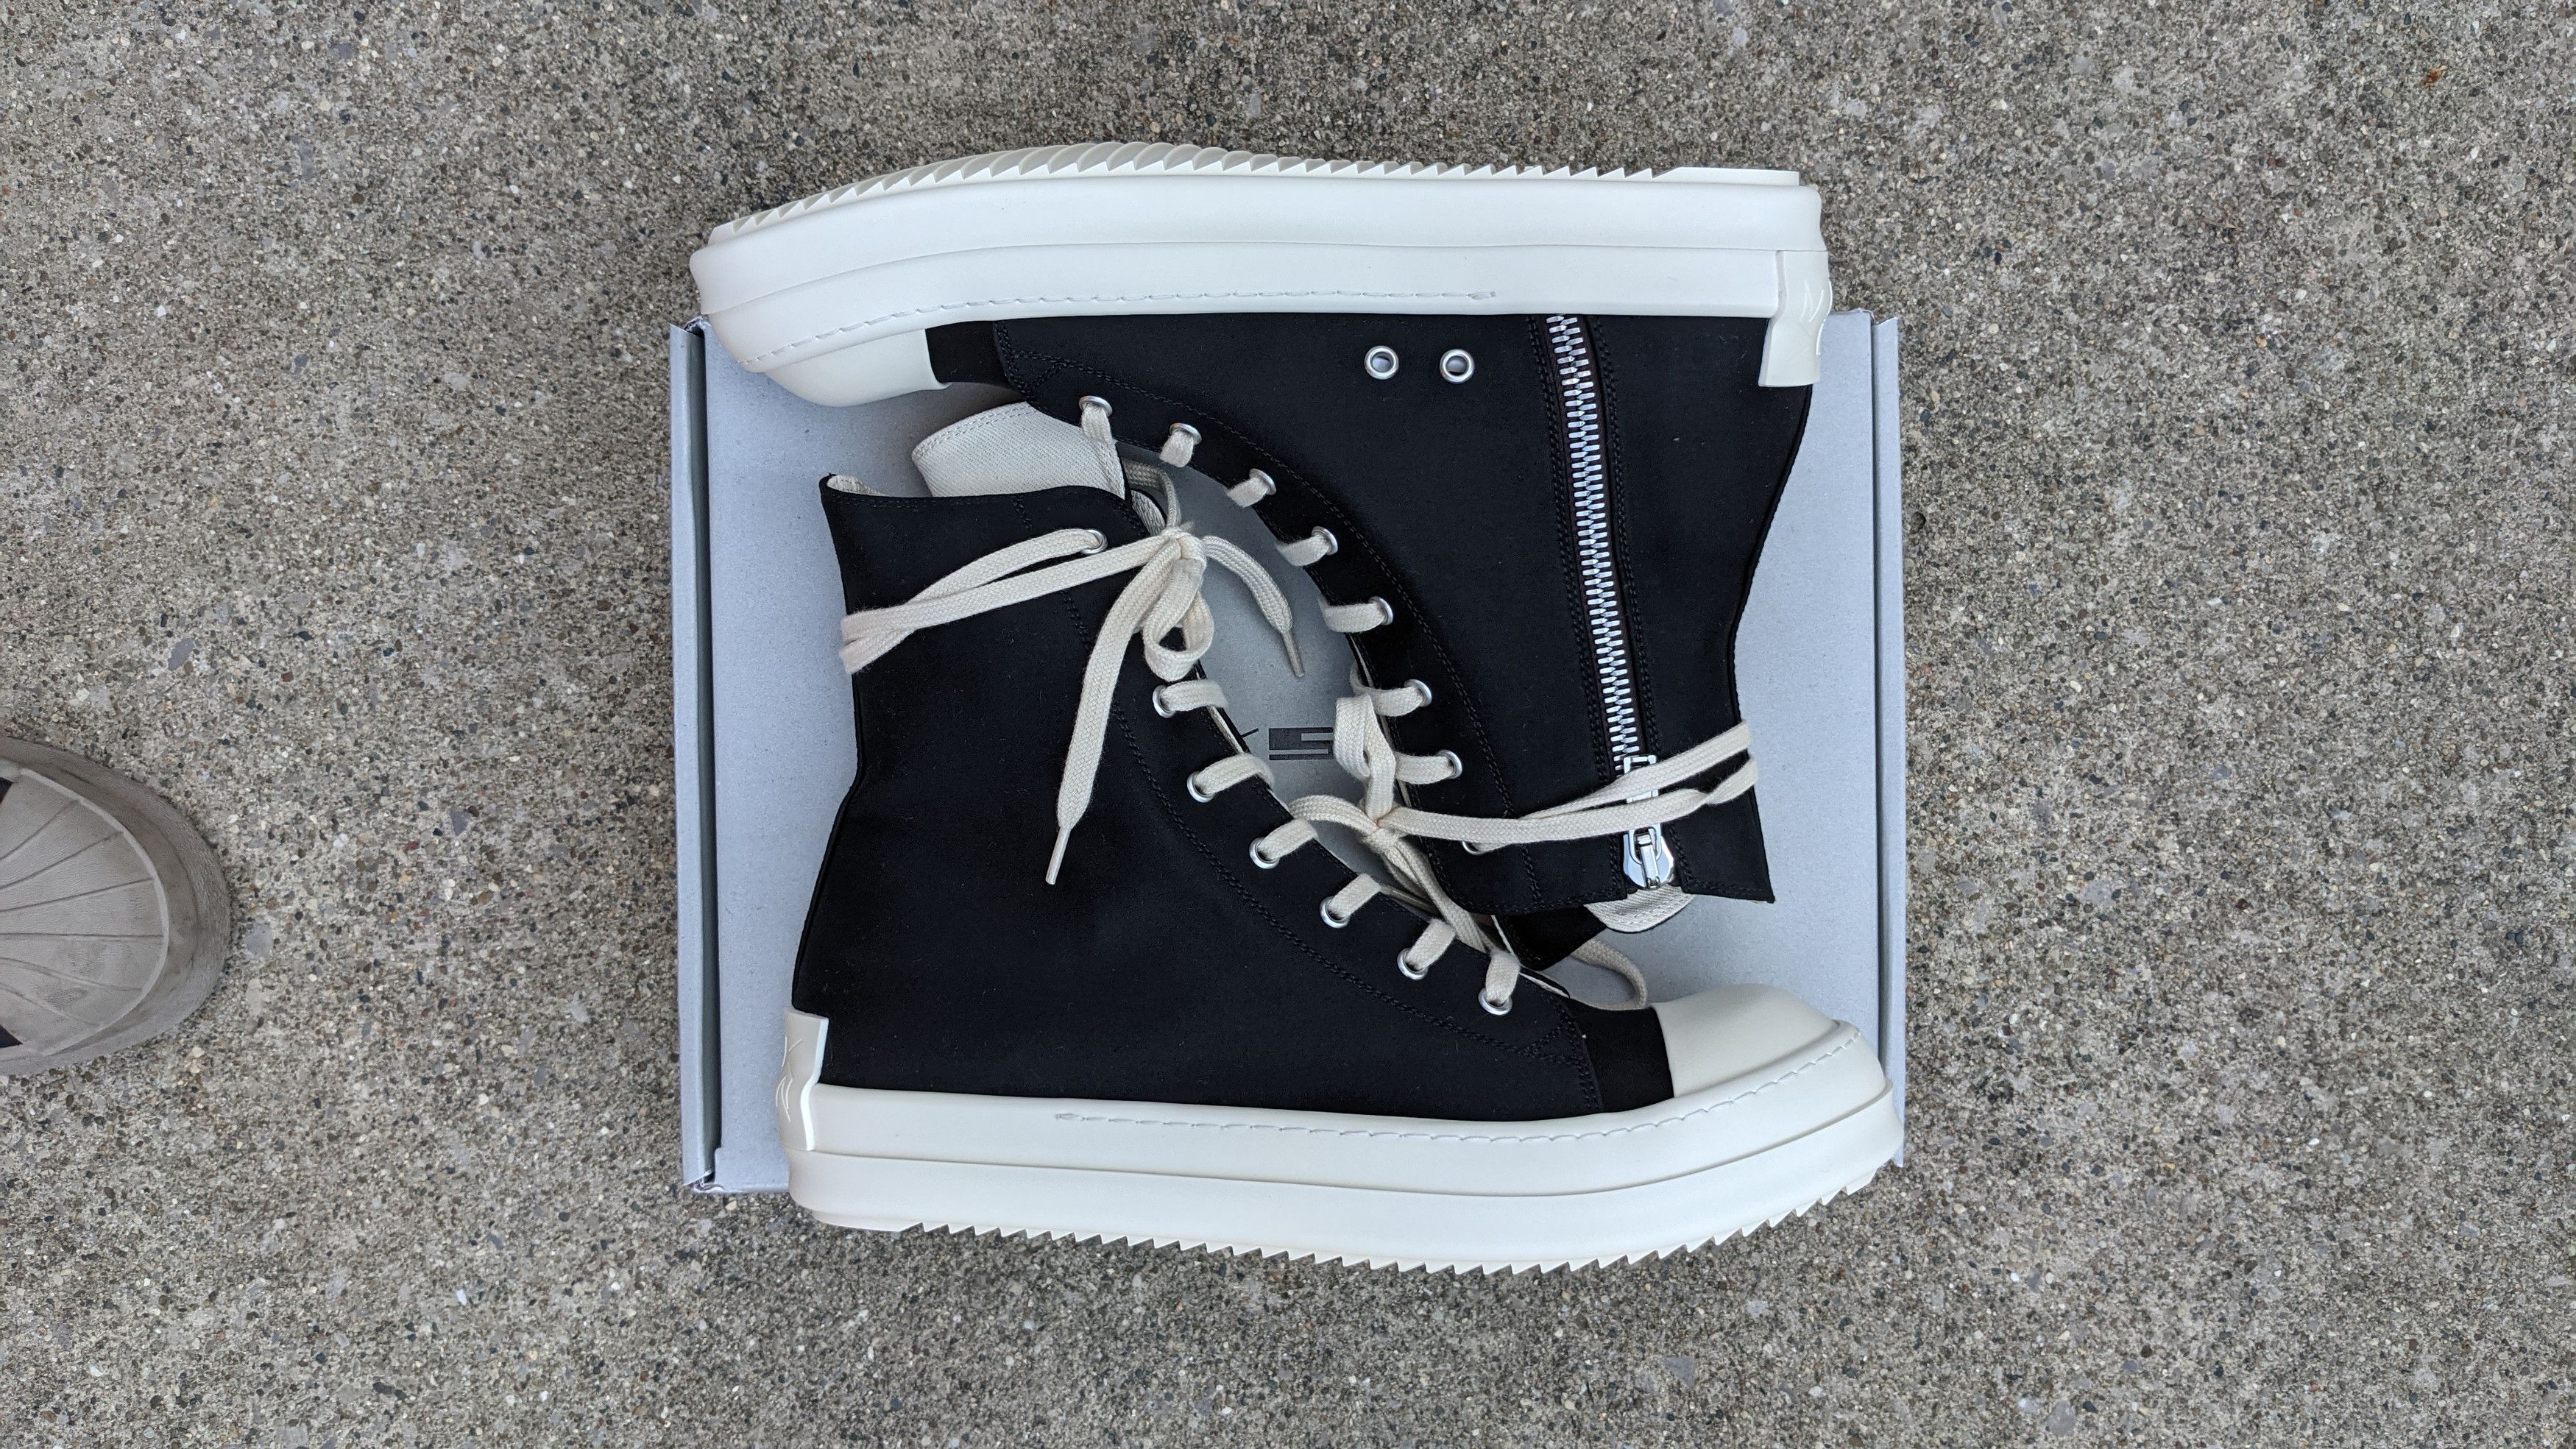 Rick Owens NEW SIZE 10.5 DRKSHDW Canvas High Ramones | Grailed